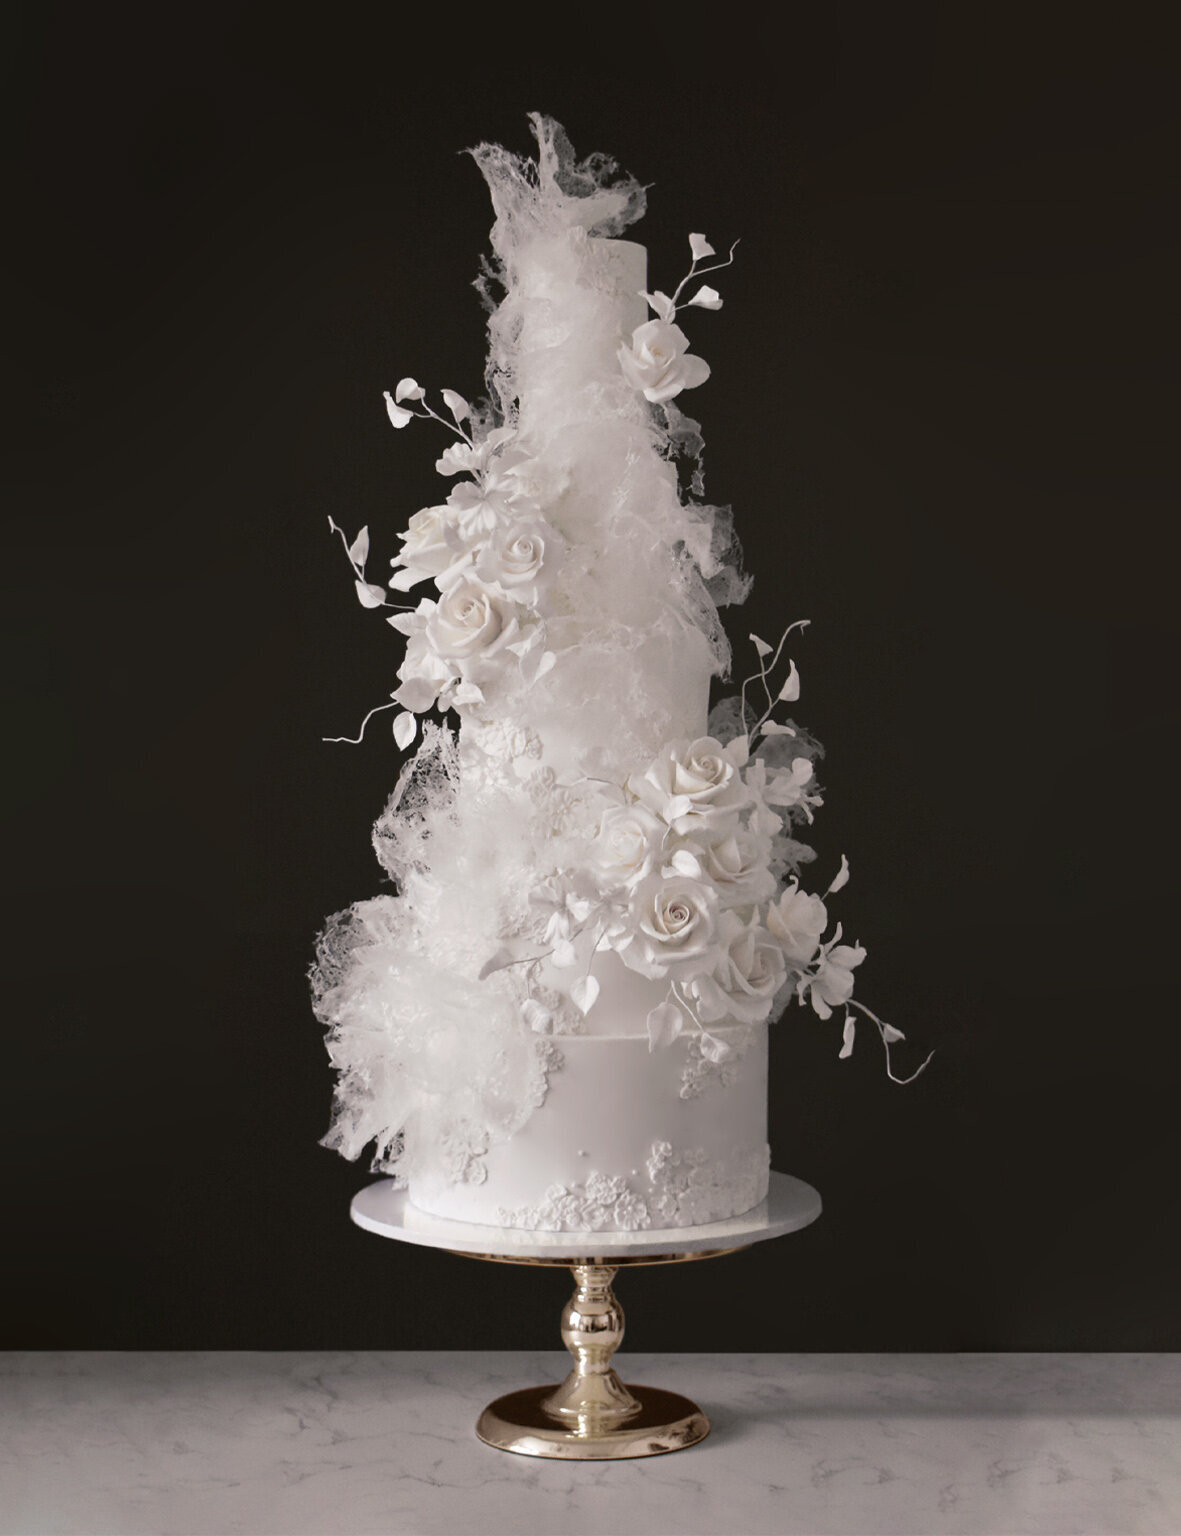 All white wedding cake with abstract textures